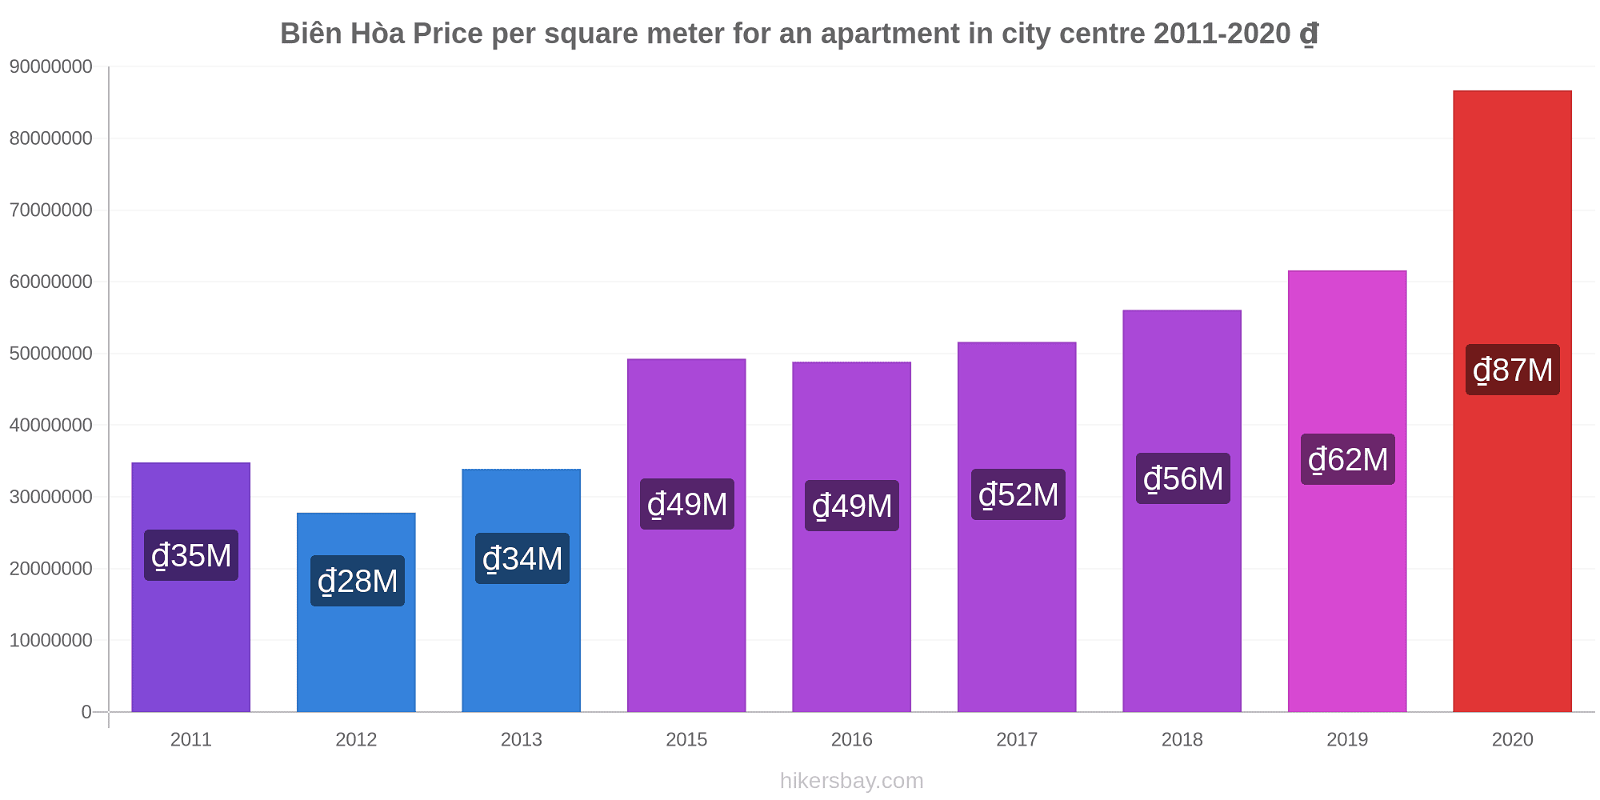 Biên Hòa price changes Price per square meter for an apartment in city centre hikersbay.com